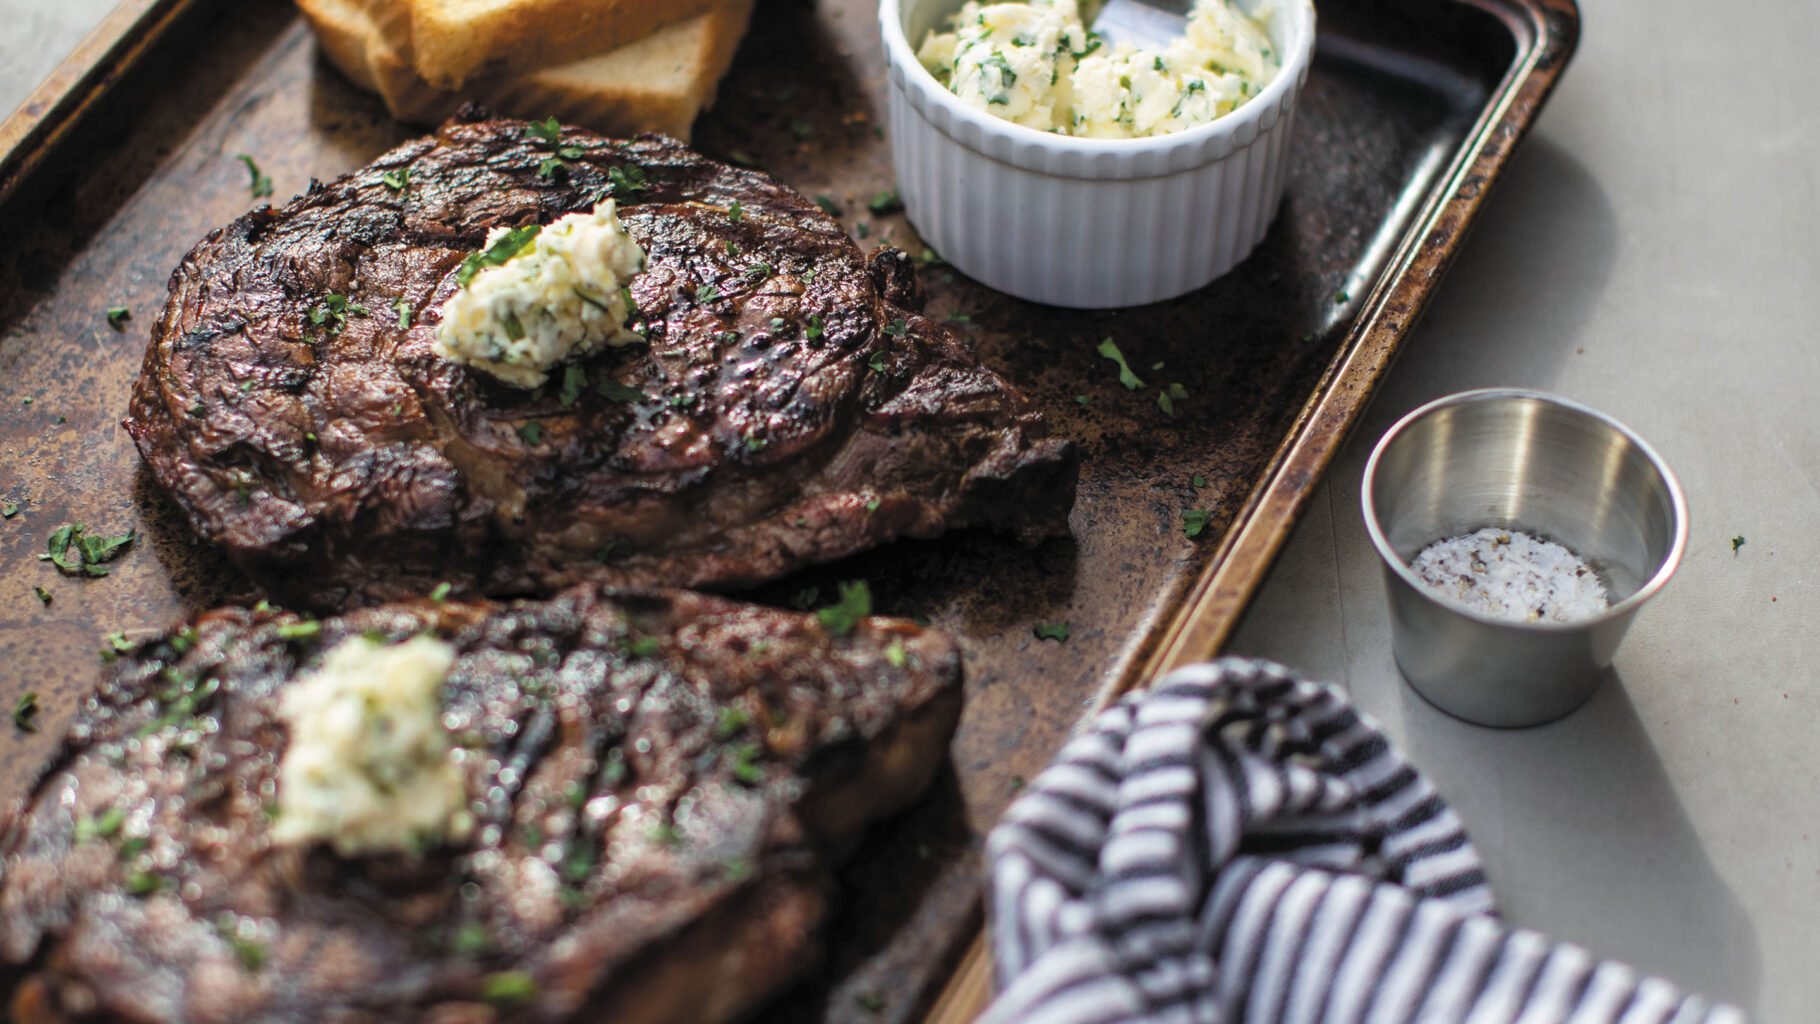 Grilled rib eye steaks recipe excerpted from Butcher on the Block by Matt Moore. © Matt Moore 2023. Published by Harvest, an imprint of HarperCollins. Photos © Andrea Behrends.